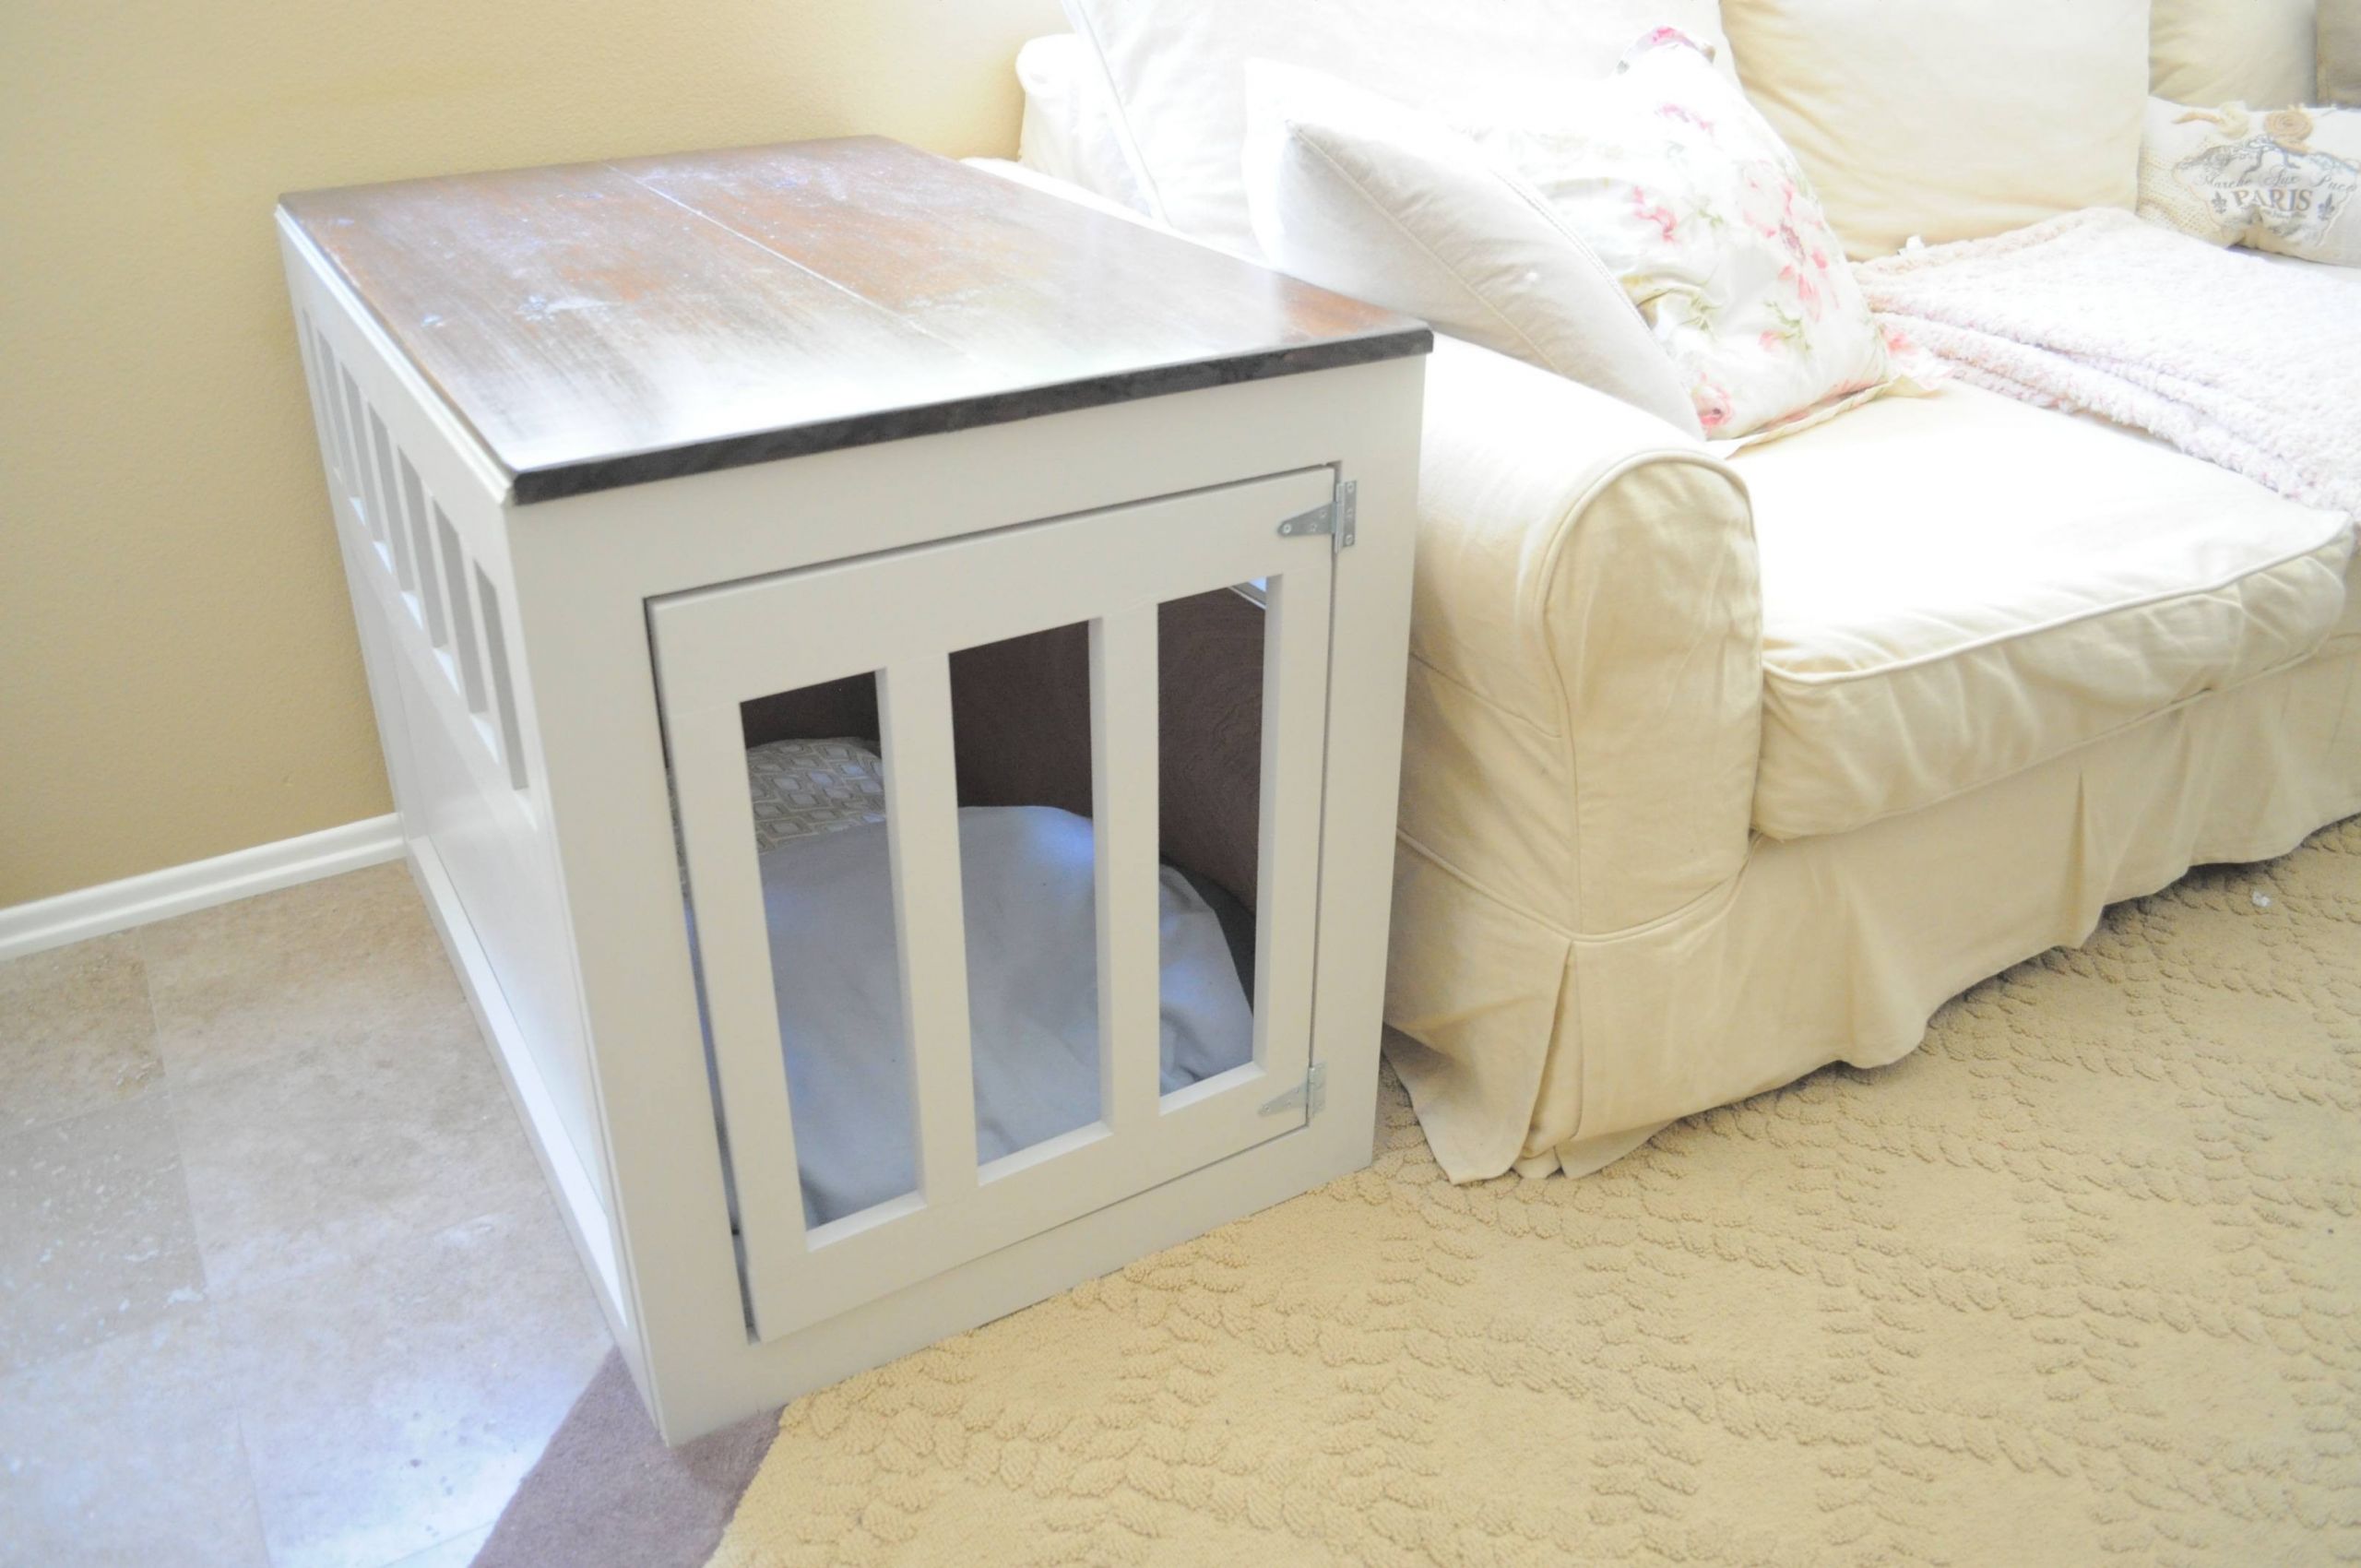 DIY Dog Crate Furniture
 Every Dog Owner Should Learn These 20 DIY Pet Projects